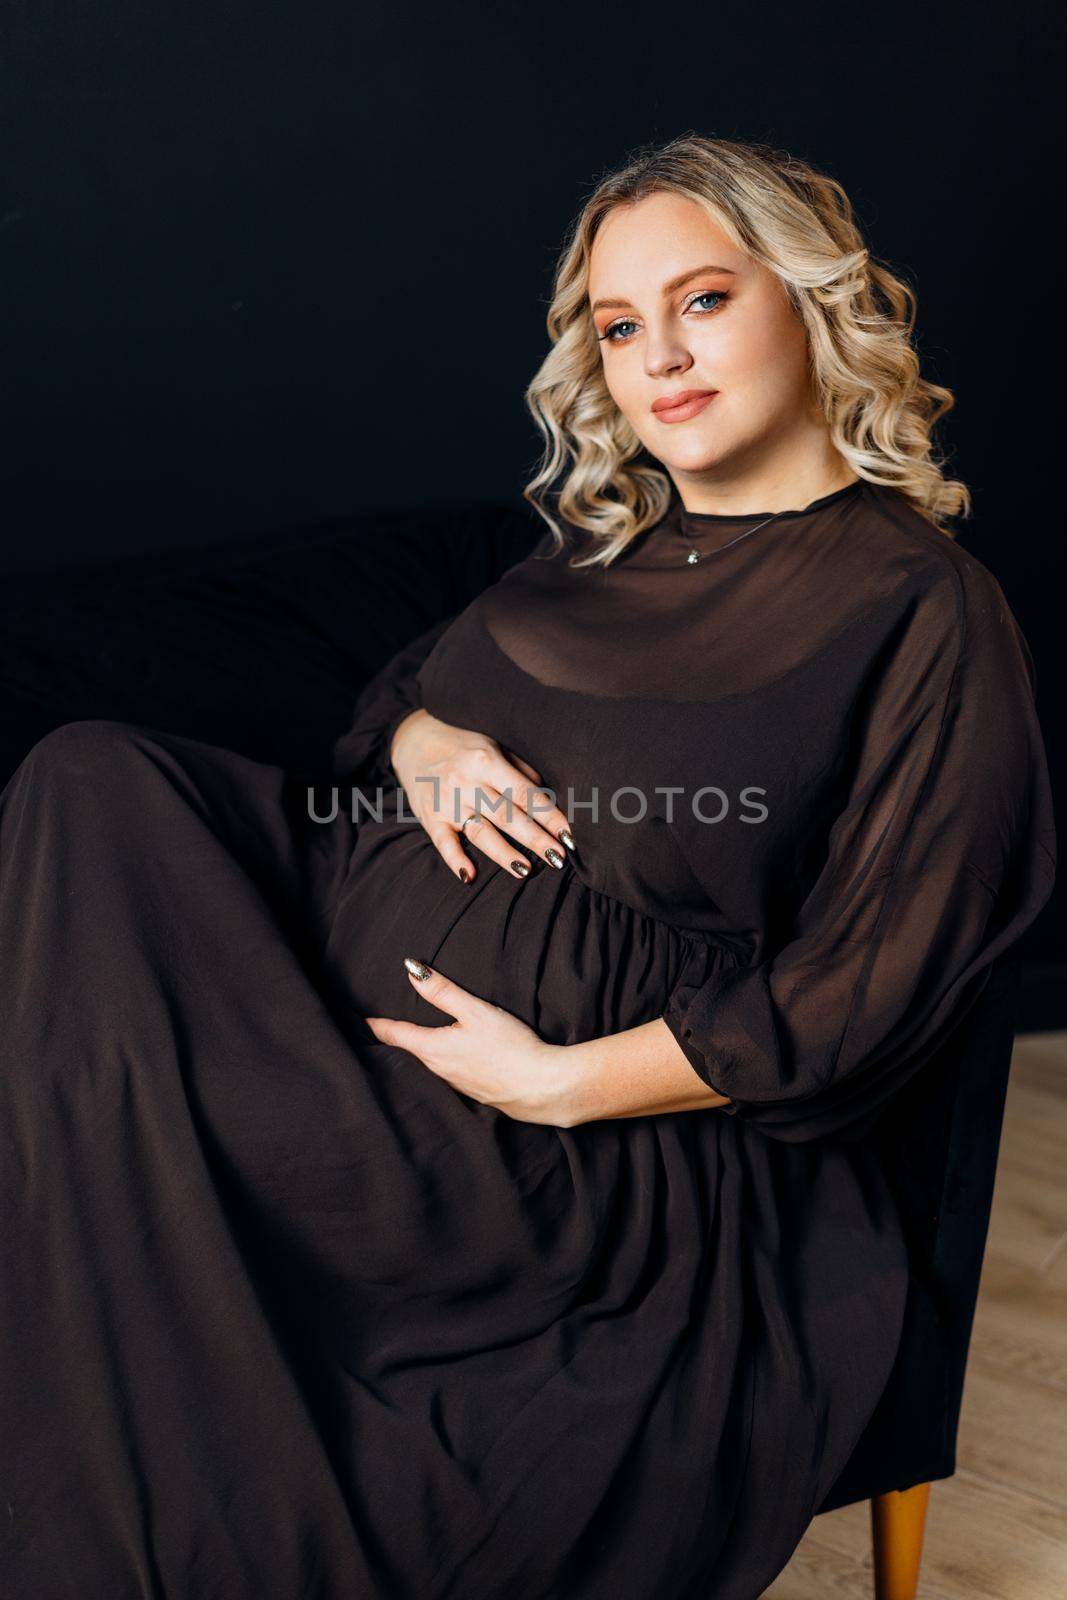 Pregnant Woman Posing In An Elegant black Dress indoors studio black wall background Blonde caucasian middle age female six month pregnancy